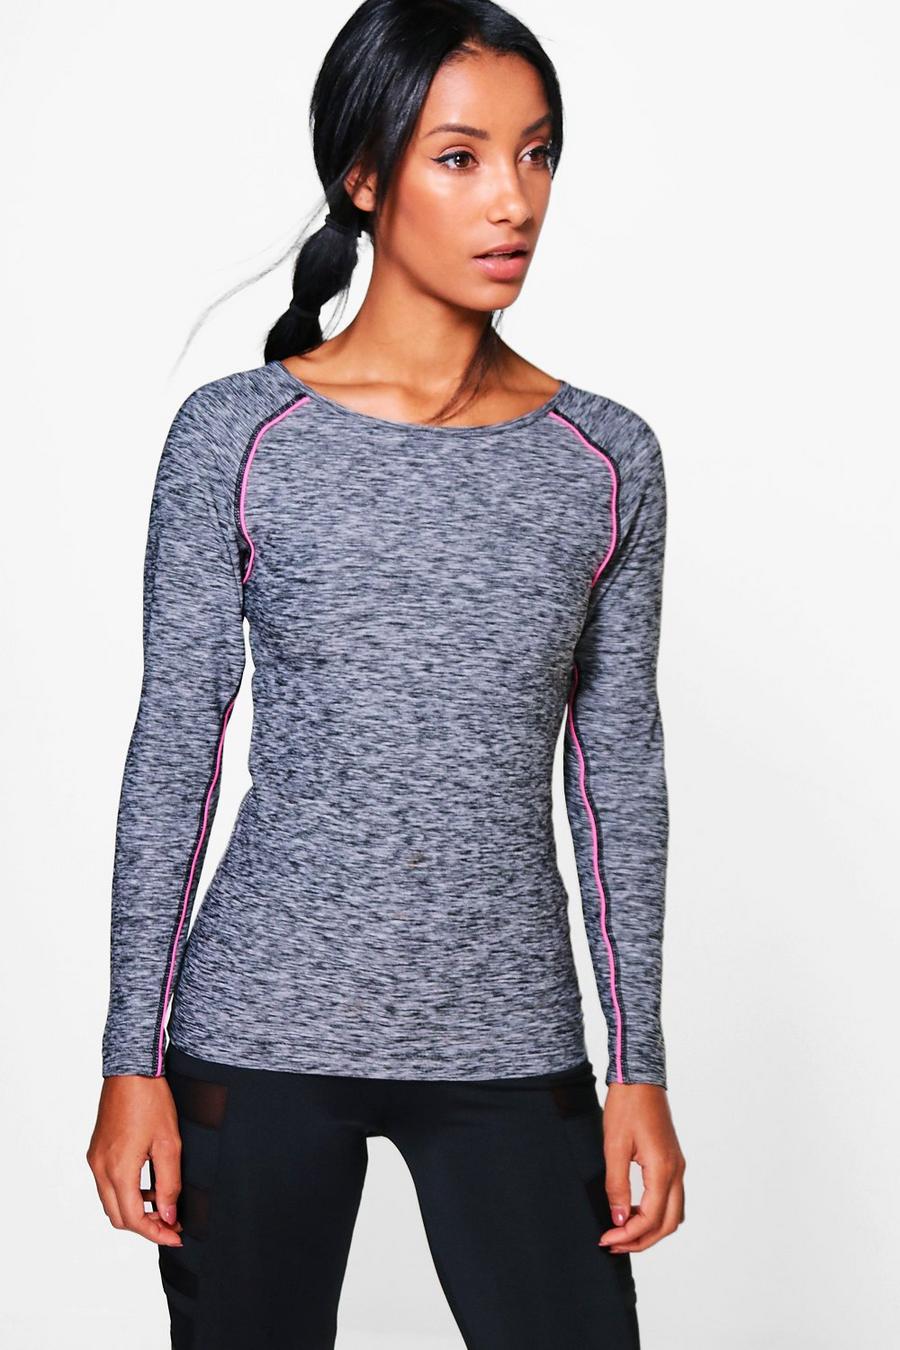 Grey Amy Fit Long Sleeve Running Tee image number 1